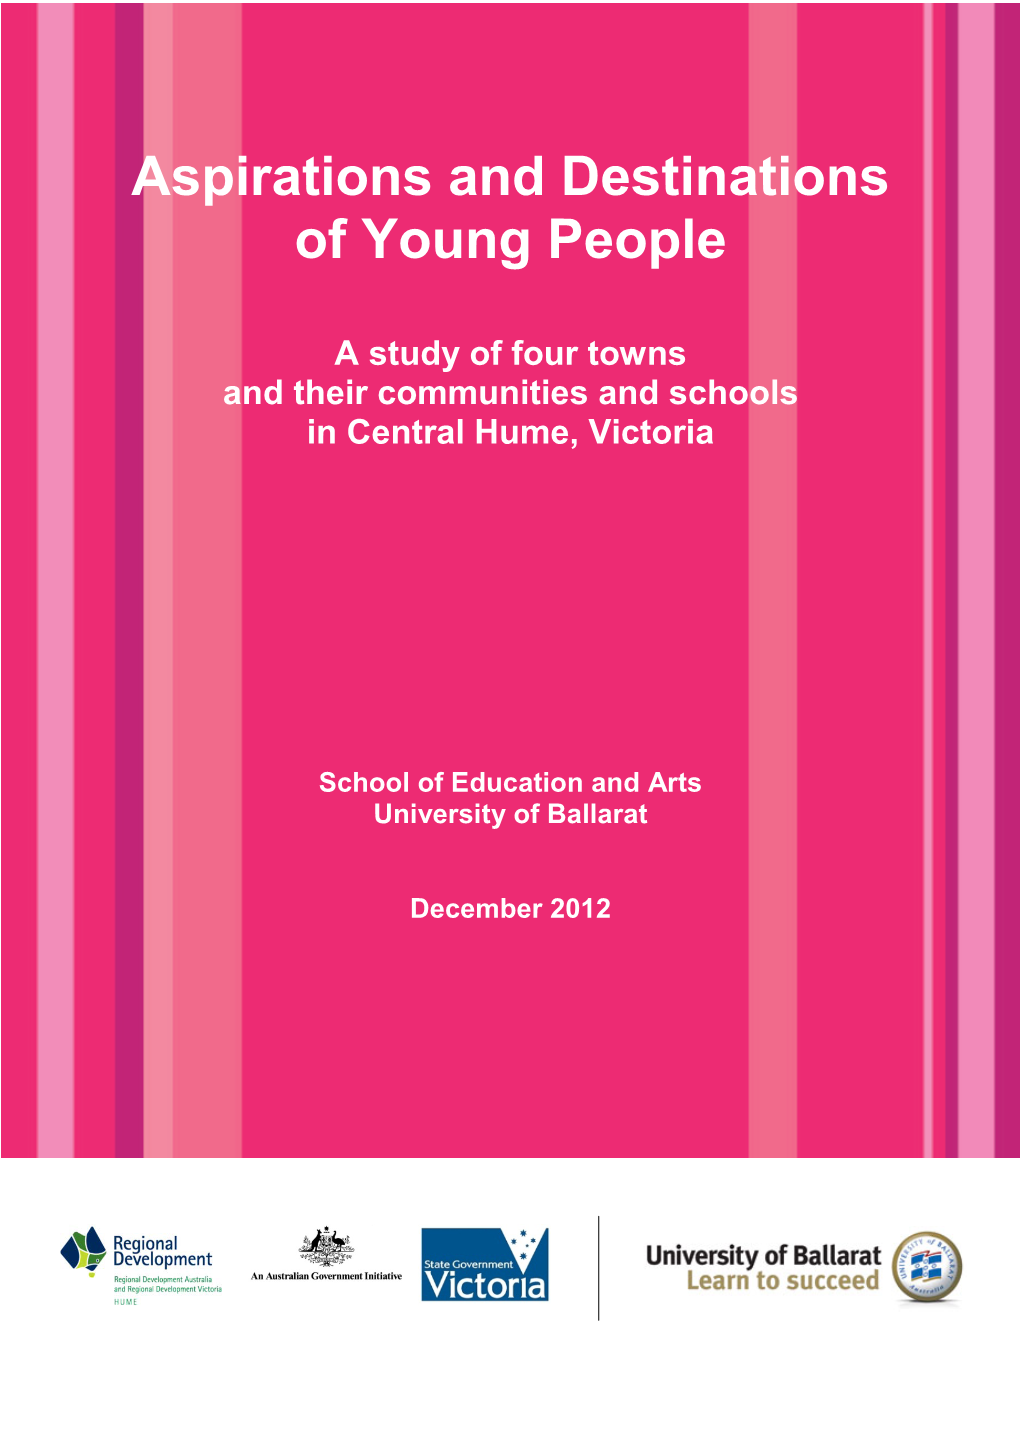 Aspirations and Destinations of Young People: University of Ballarat